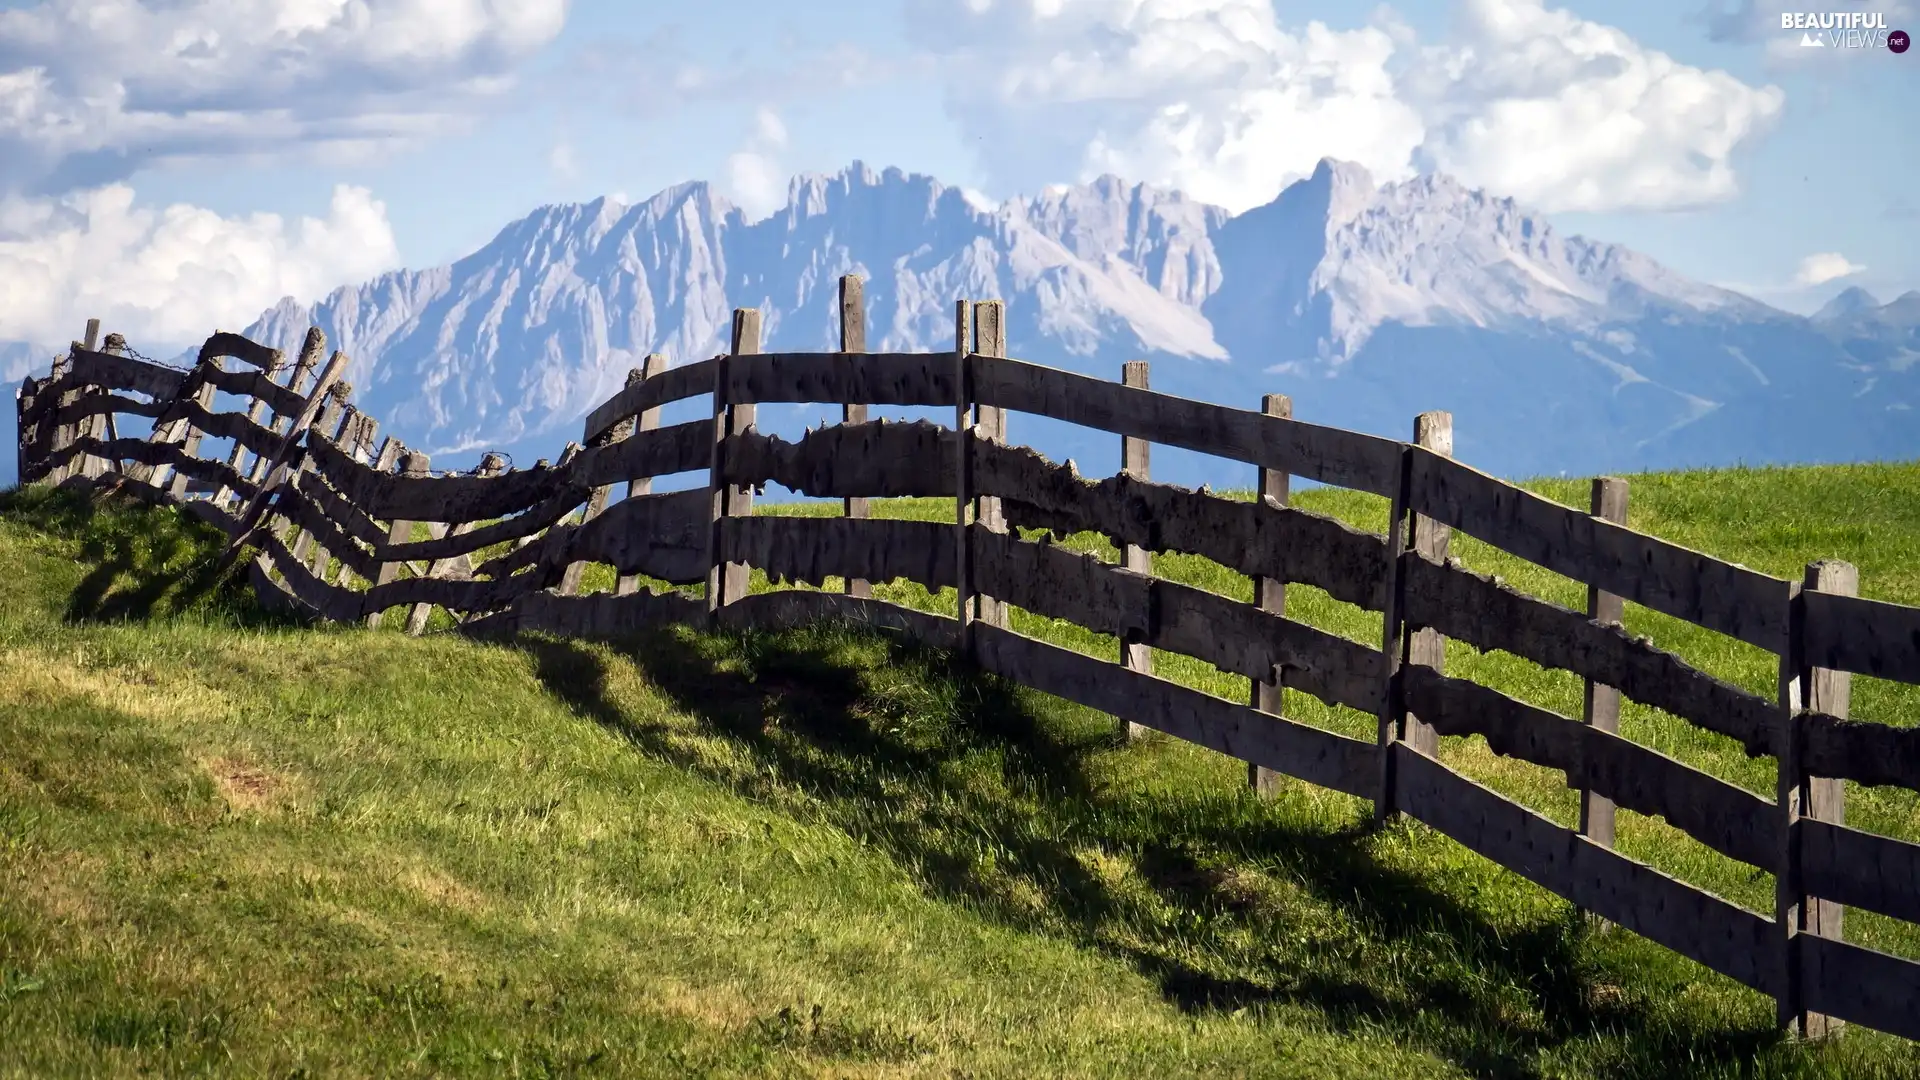 Mountains, fence, clouds, medows